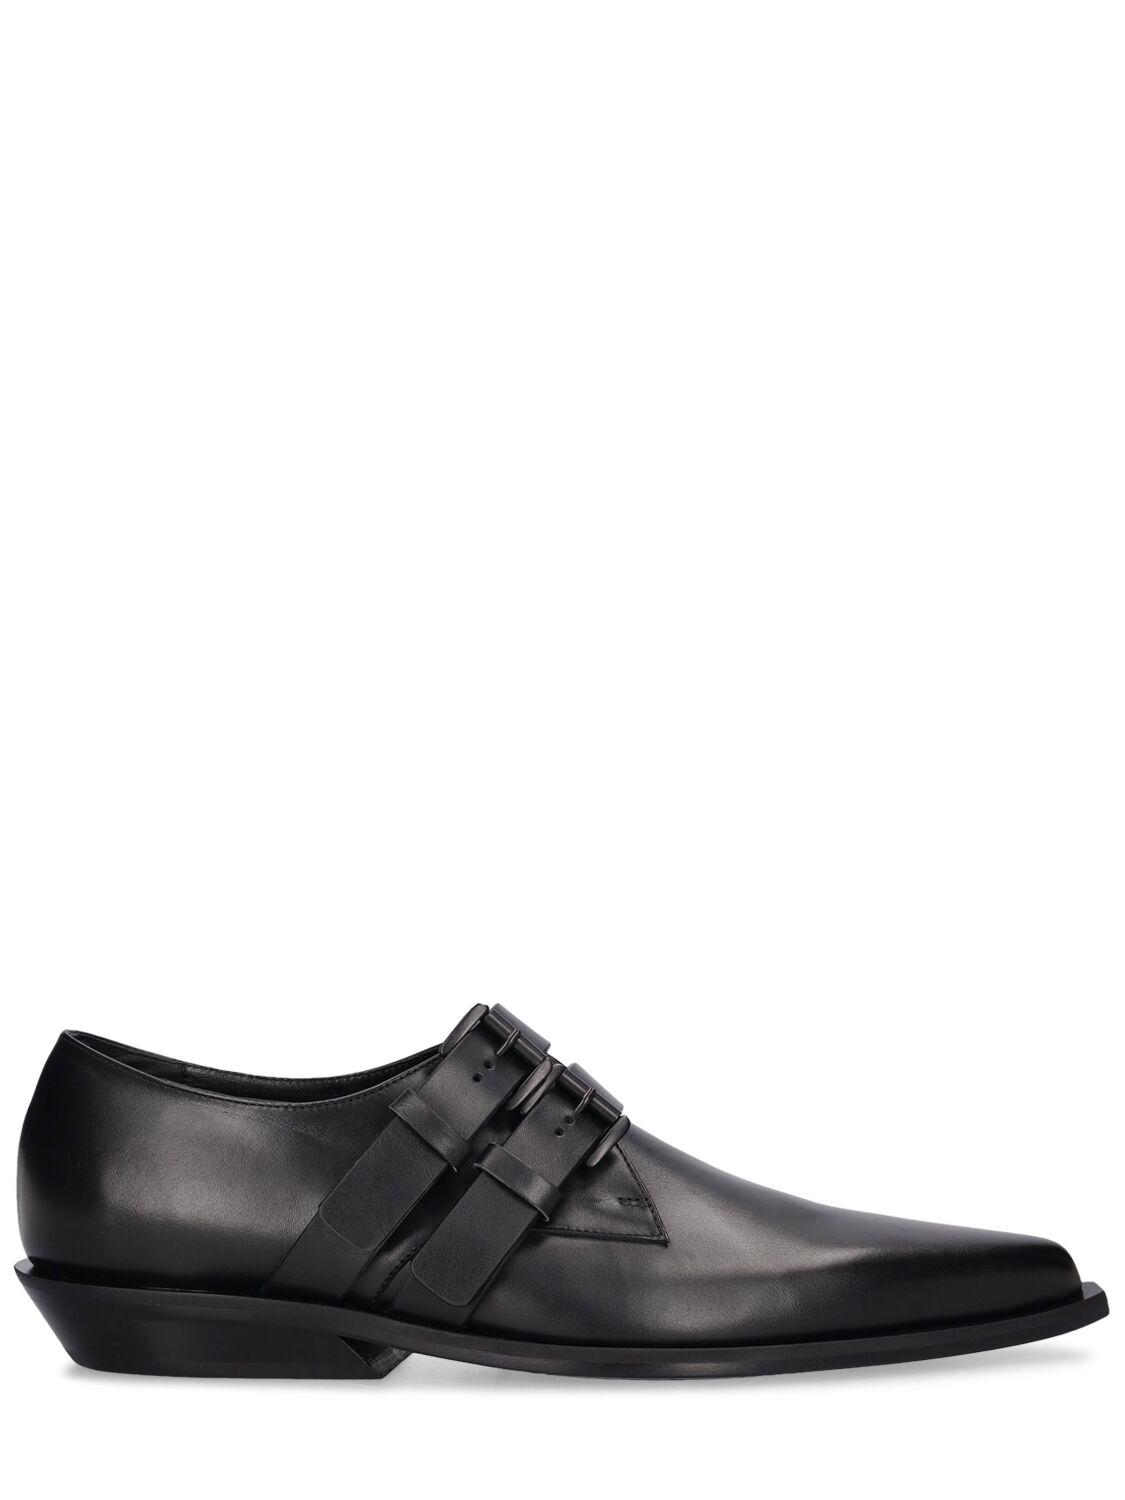 Image of Bowie Double Monk Strap Shoes